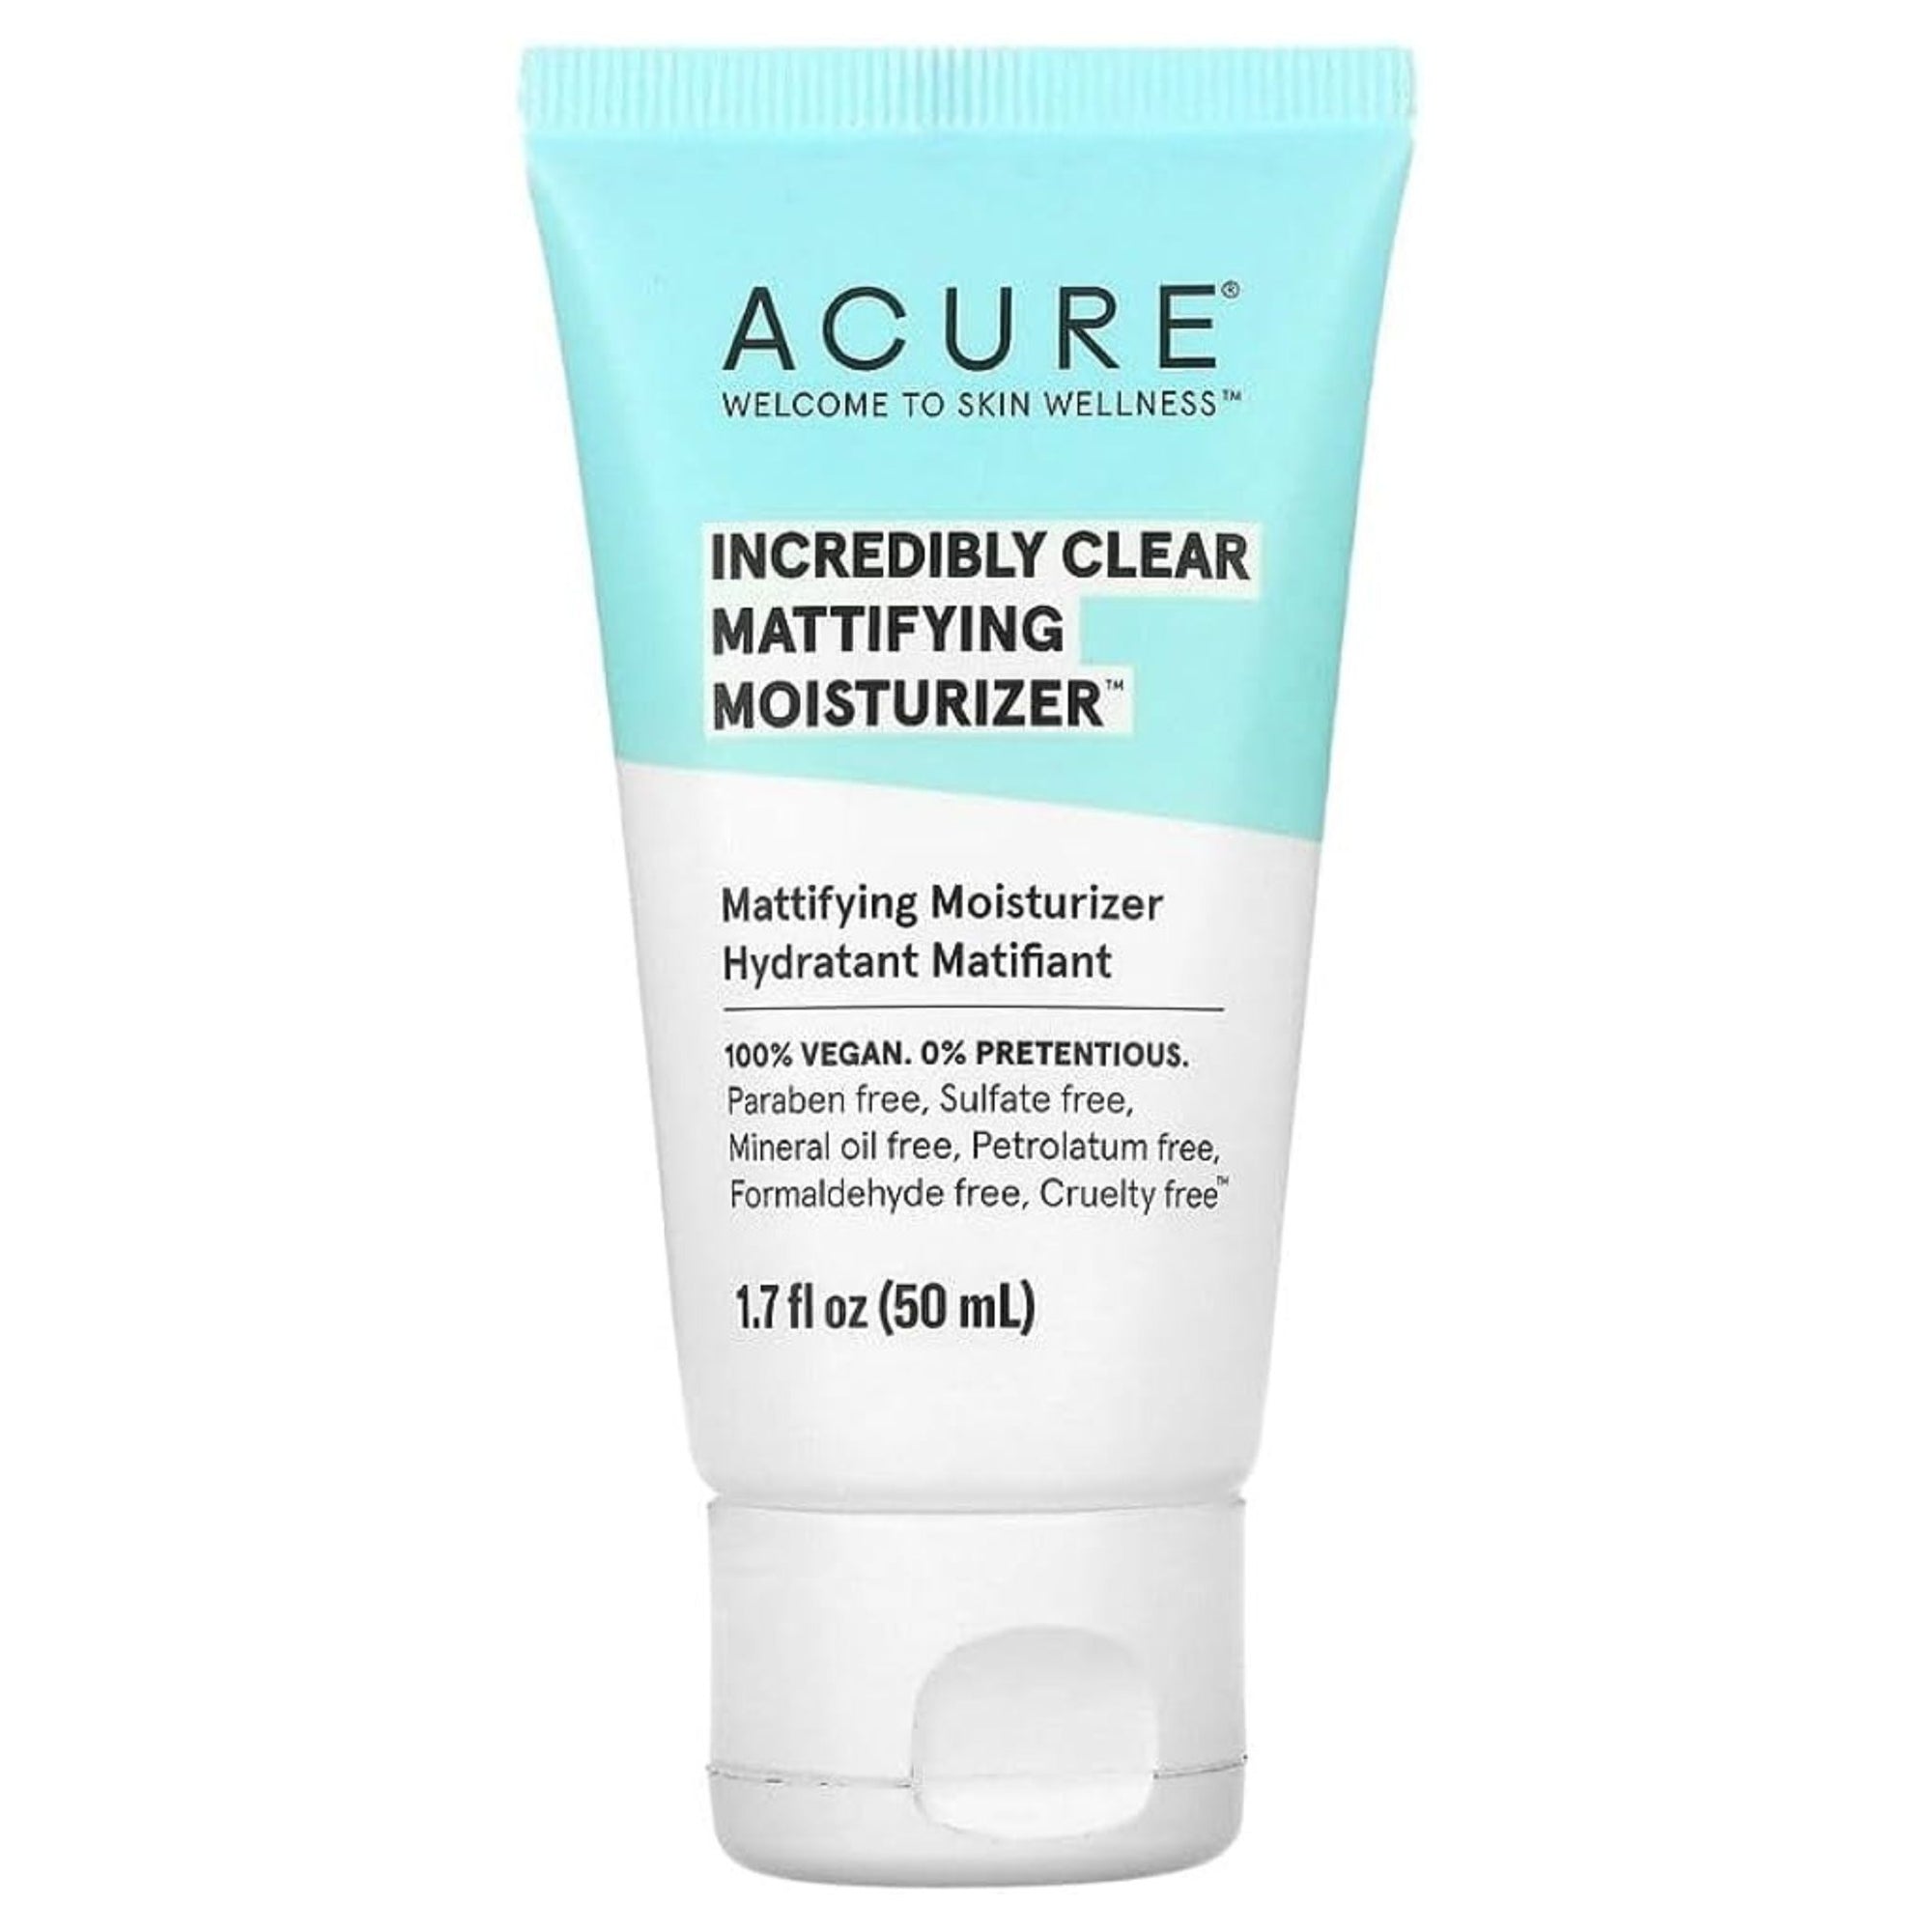 Acure Incredibly Clear Mattifying Moisturizer 50ml